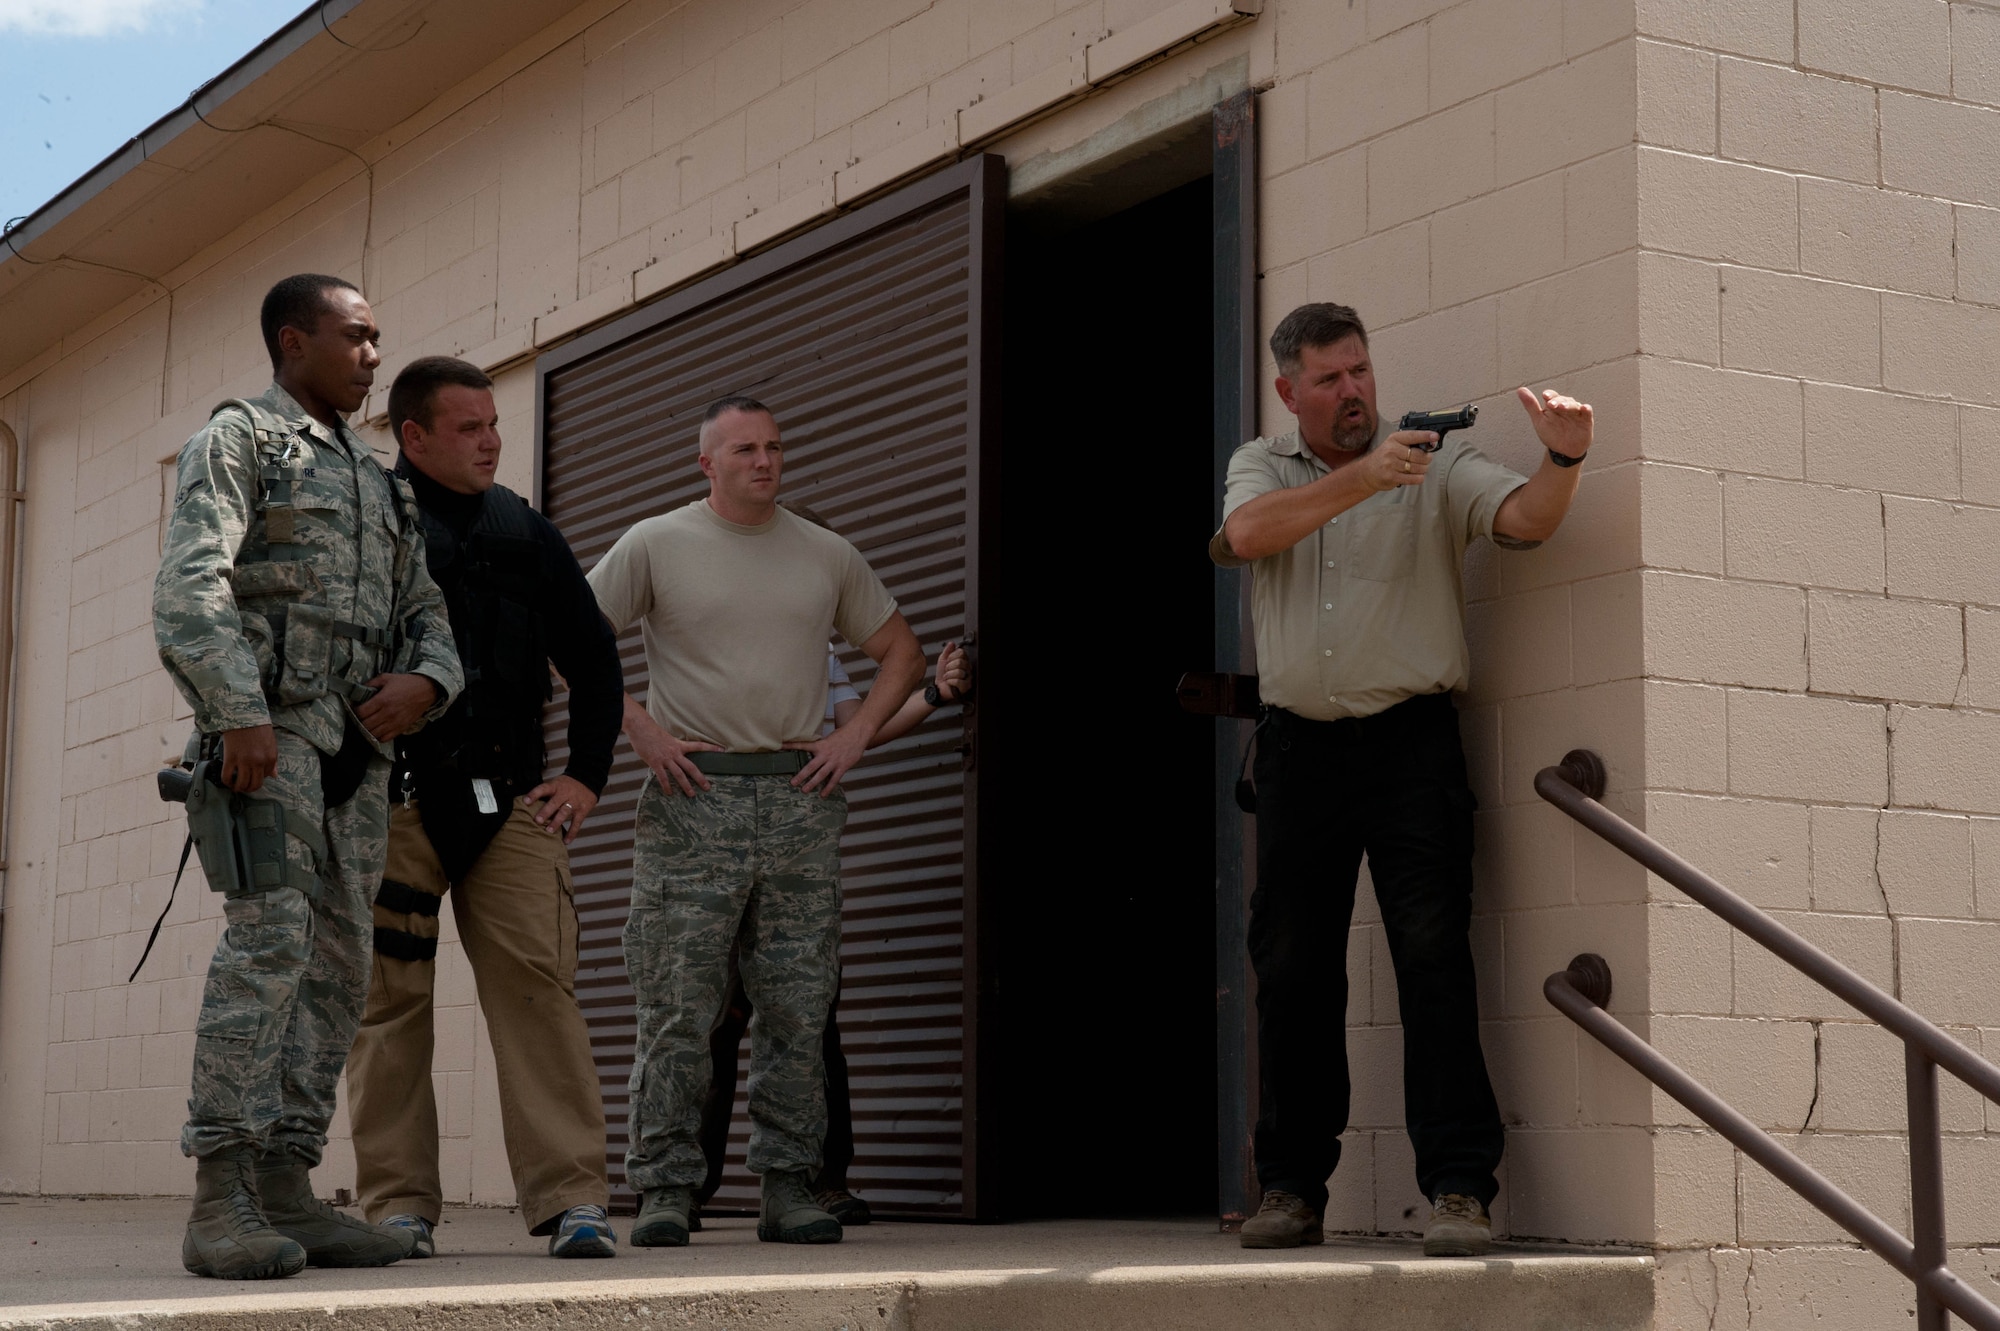 Dion Harris (far right), 28th Security Forces lead training instructor, helps 28th SFS Airmen prepare to run through an active shooter course at Ellsworth Air Force Base, S.D., Aug. 24, 2012. The course focused on preparing Defenders to rapidly and effectively respond to an active shooter scenario. (U.S. Air Force photo by Airman 1st Class Zachary Hada/Released)